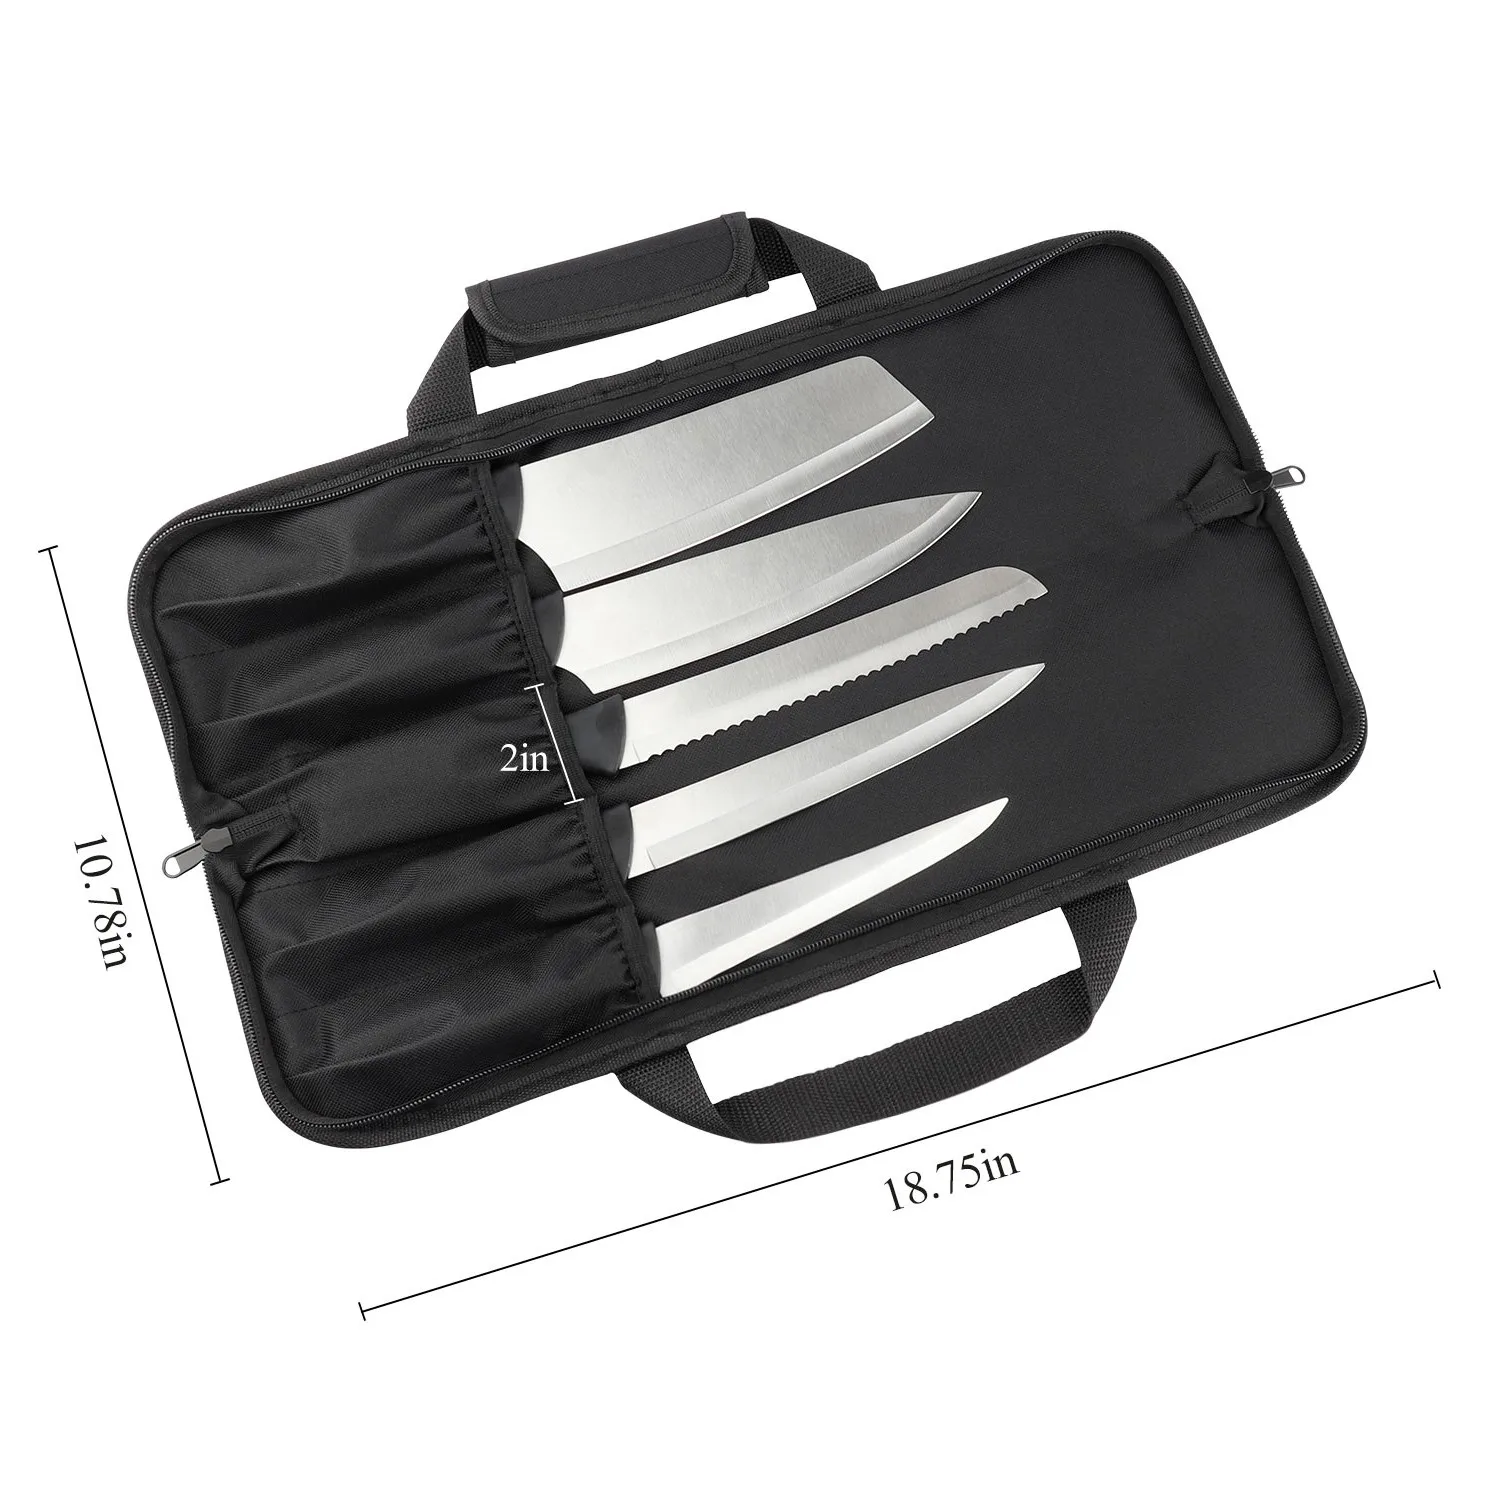 WESSLECO Nylon Chef Knife Bag Carrying Folding Pocket Kitchen Storage Case for School Traveling Party